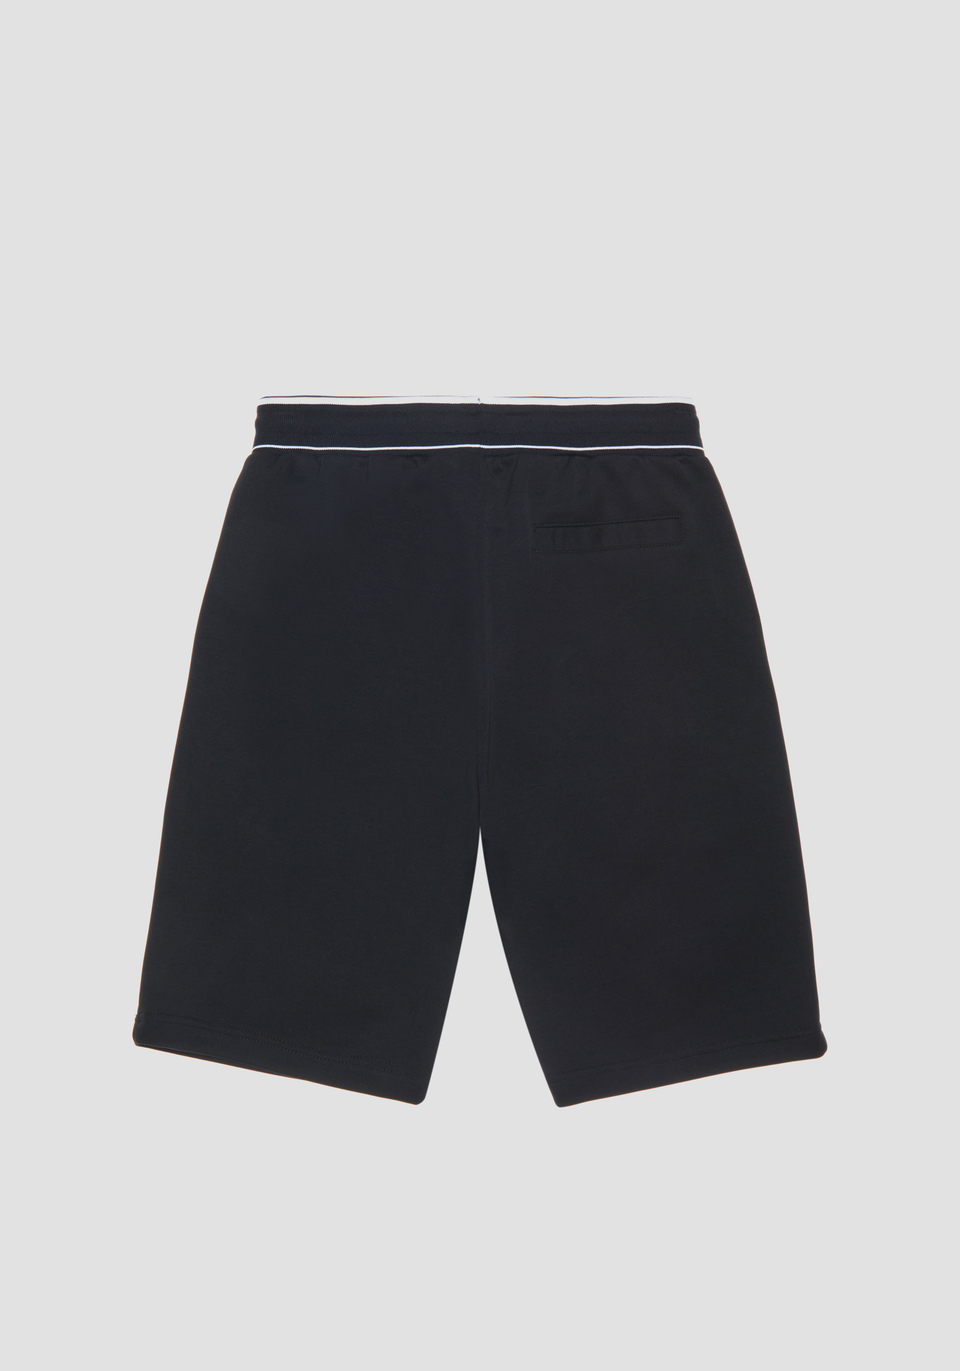 REGULAR FIT SWEATSHORTS IN SOFT COTTON BLEND WITH ZIPPED POCKETS - Antony Morato Online Shop